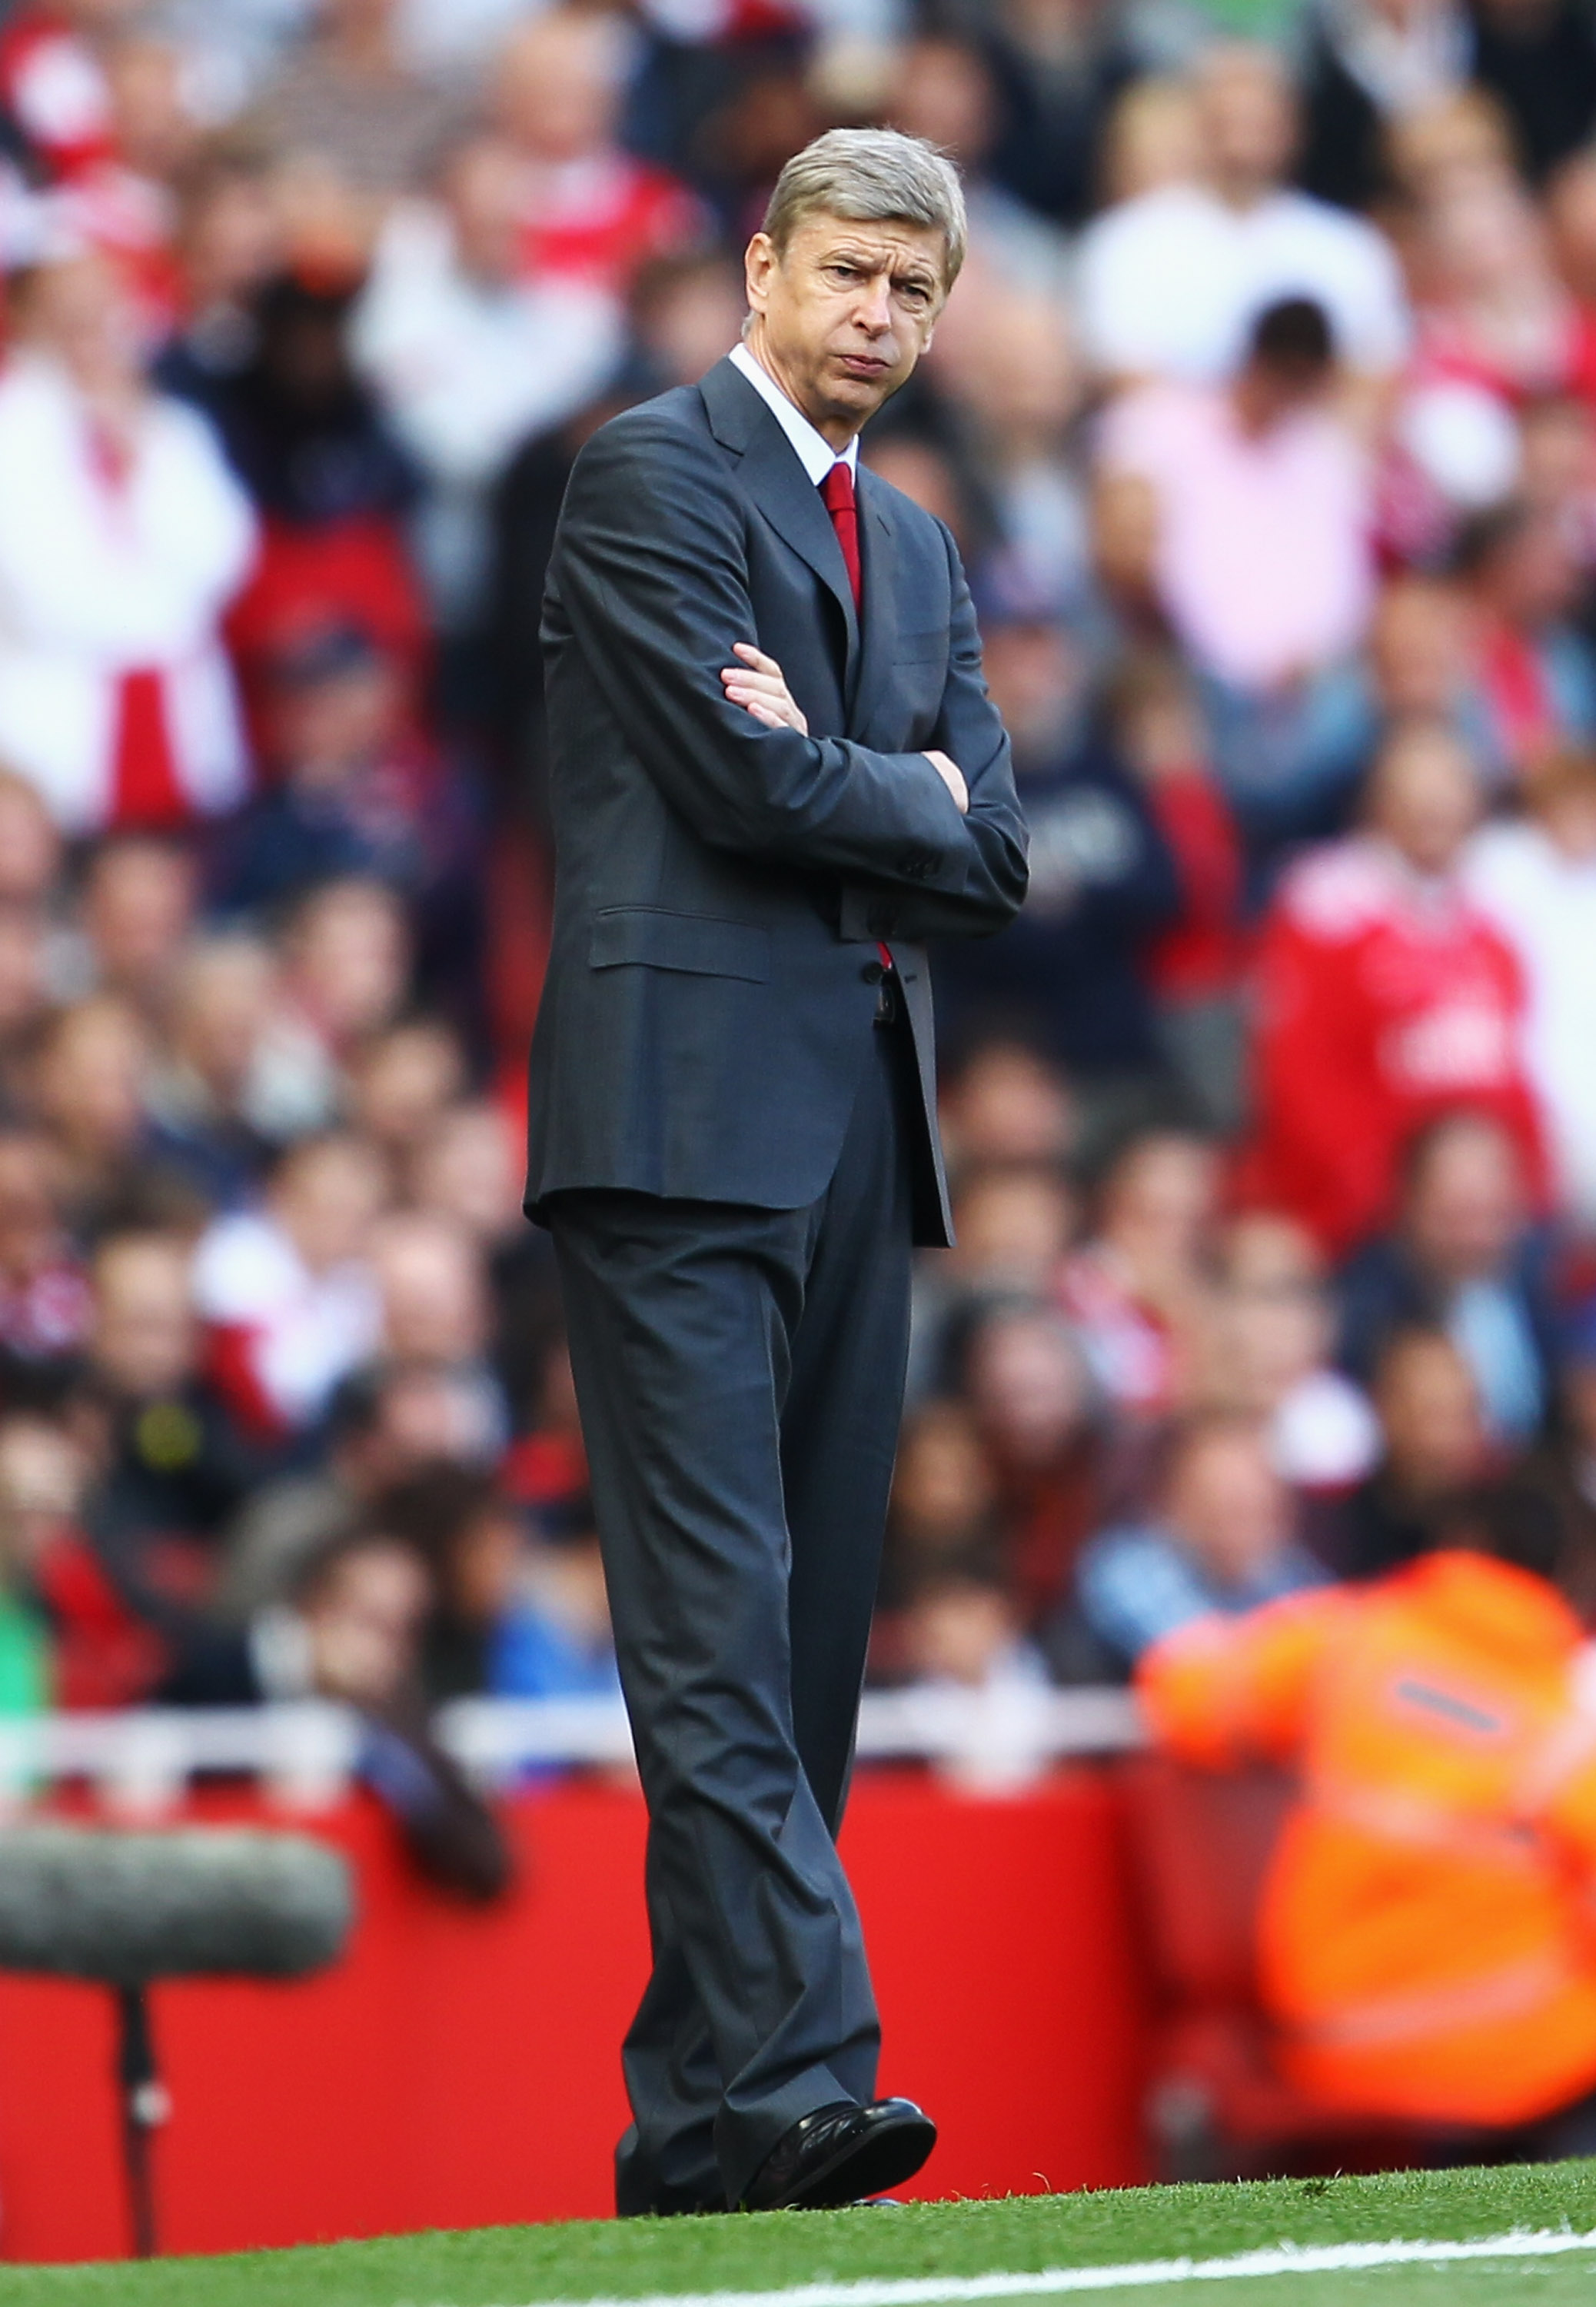 LONDON, ENGLAND - SEPTEMBER 25:  Arsene Wenger manager of Arsenal looks thoughtful during the Barclays Premier League match between Arsenal and West Bromwich Albion at the Emirates Stadium on September 25, 2010 in London, England.  (Photo by Julian Finney